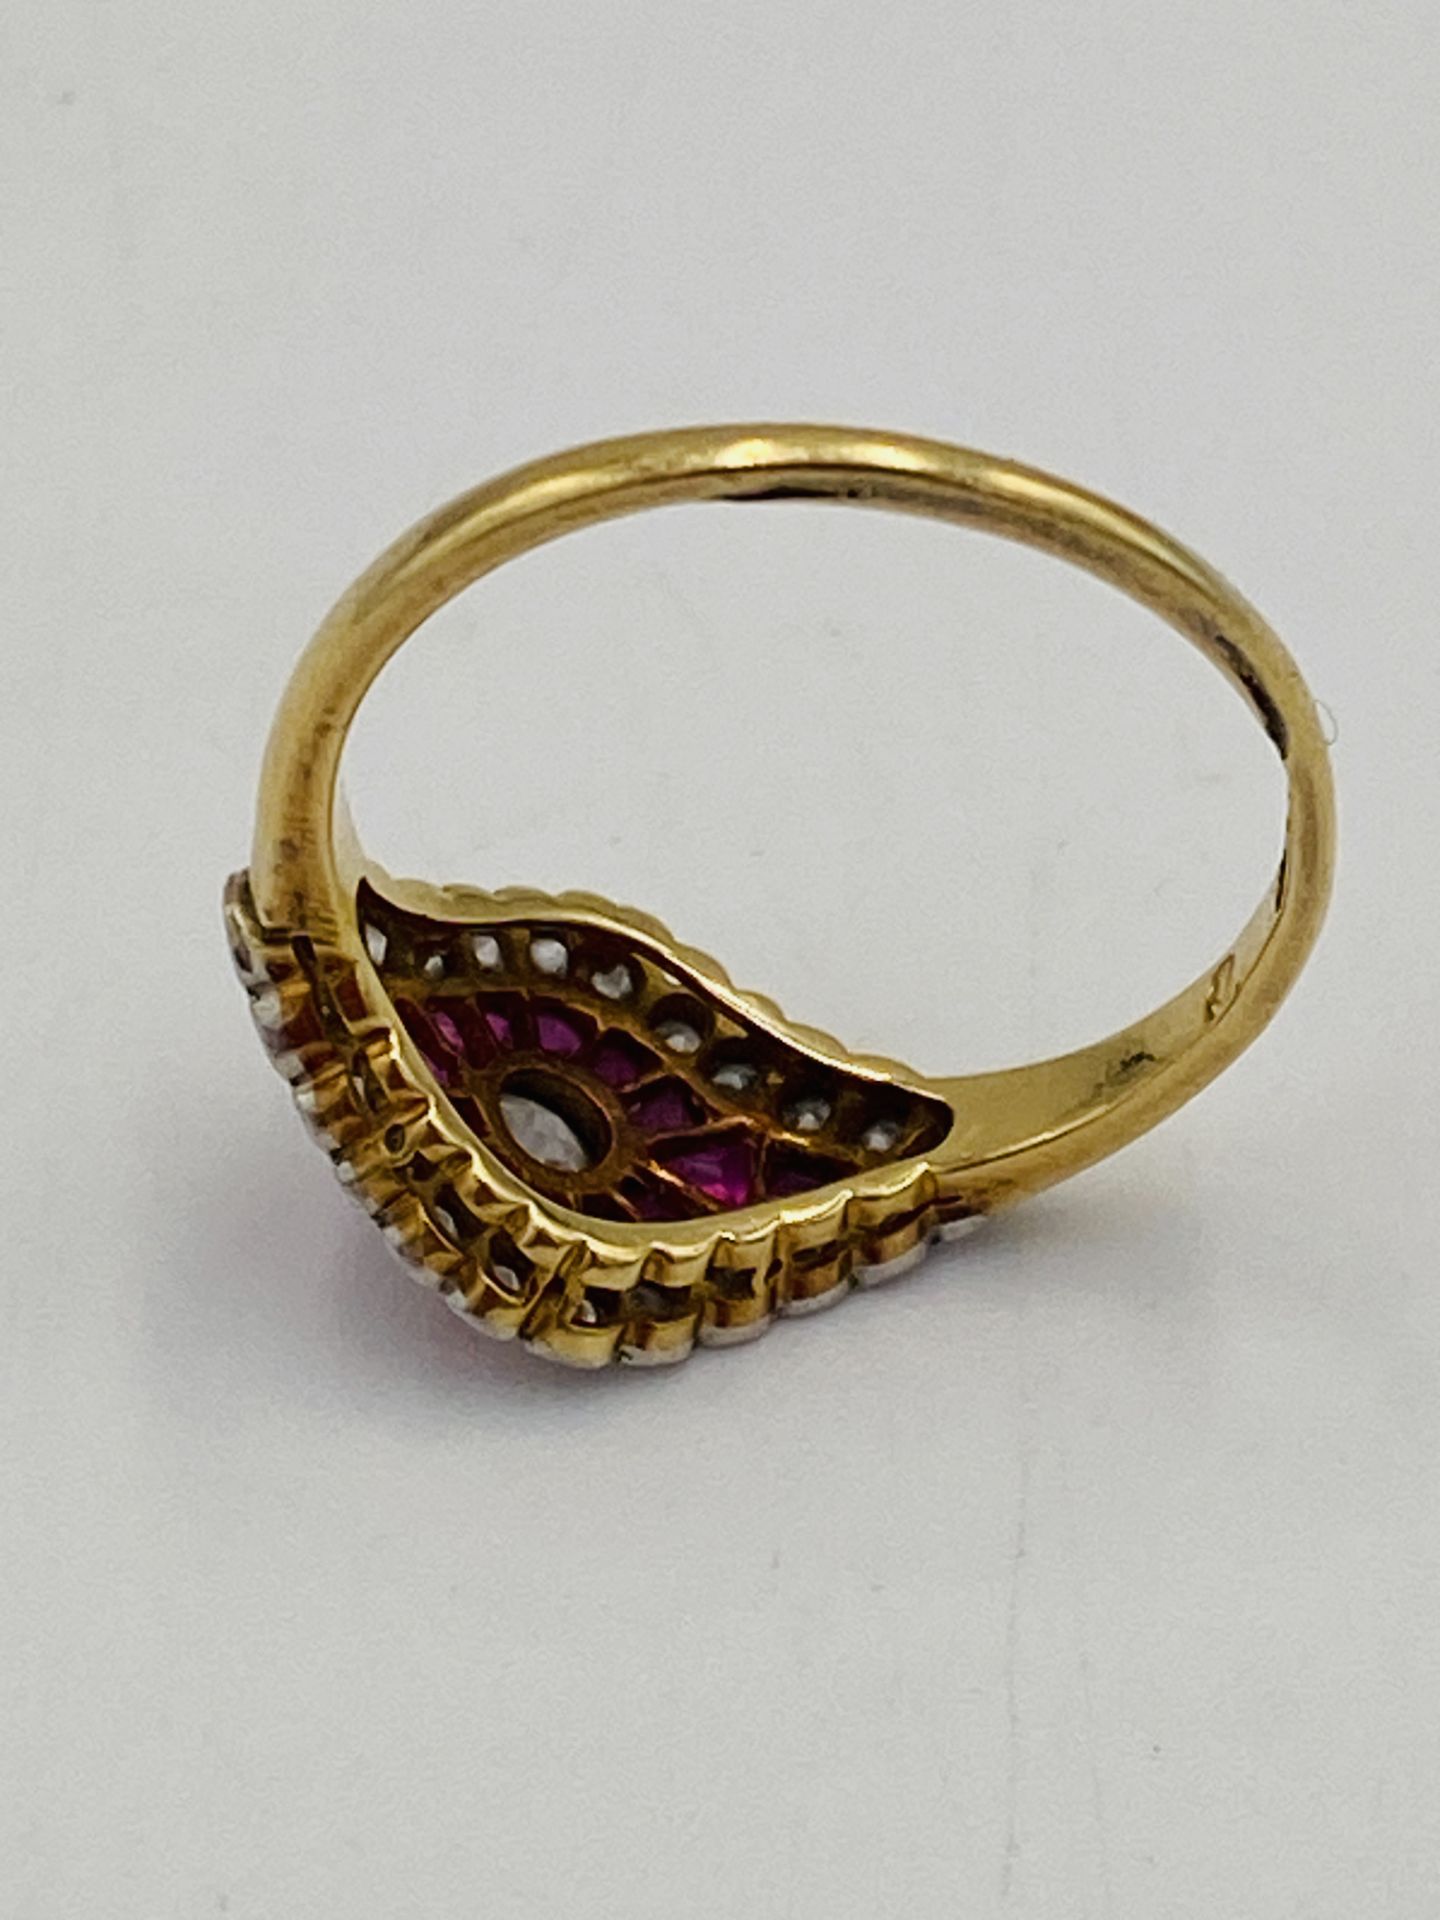 18ct gold ring set with central diamond - Image 4 of 6